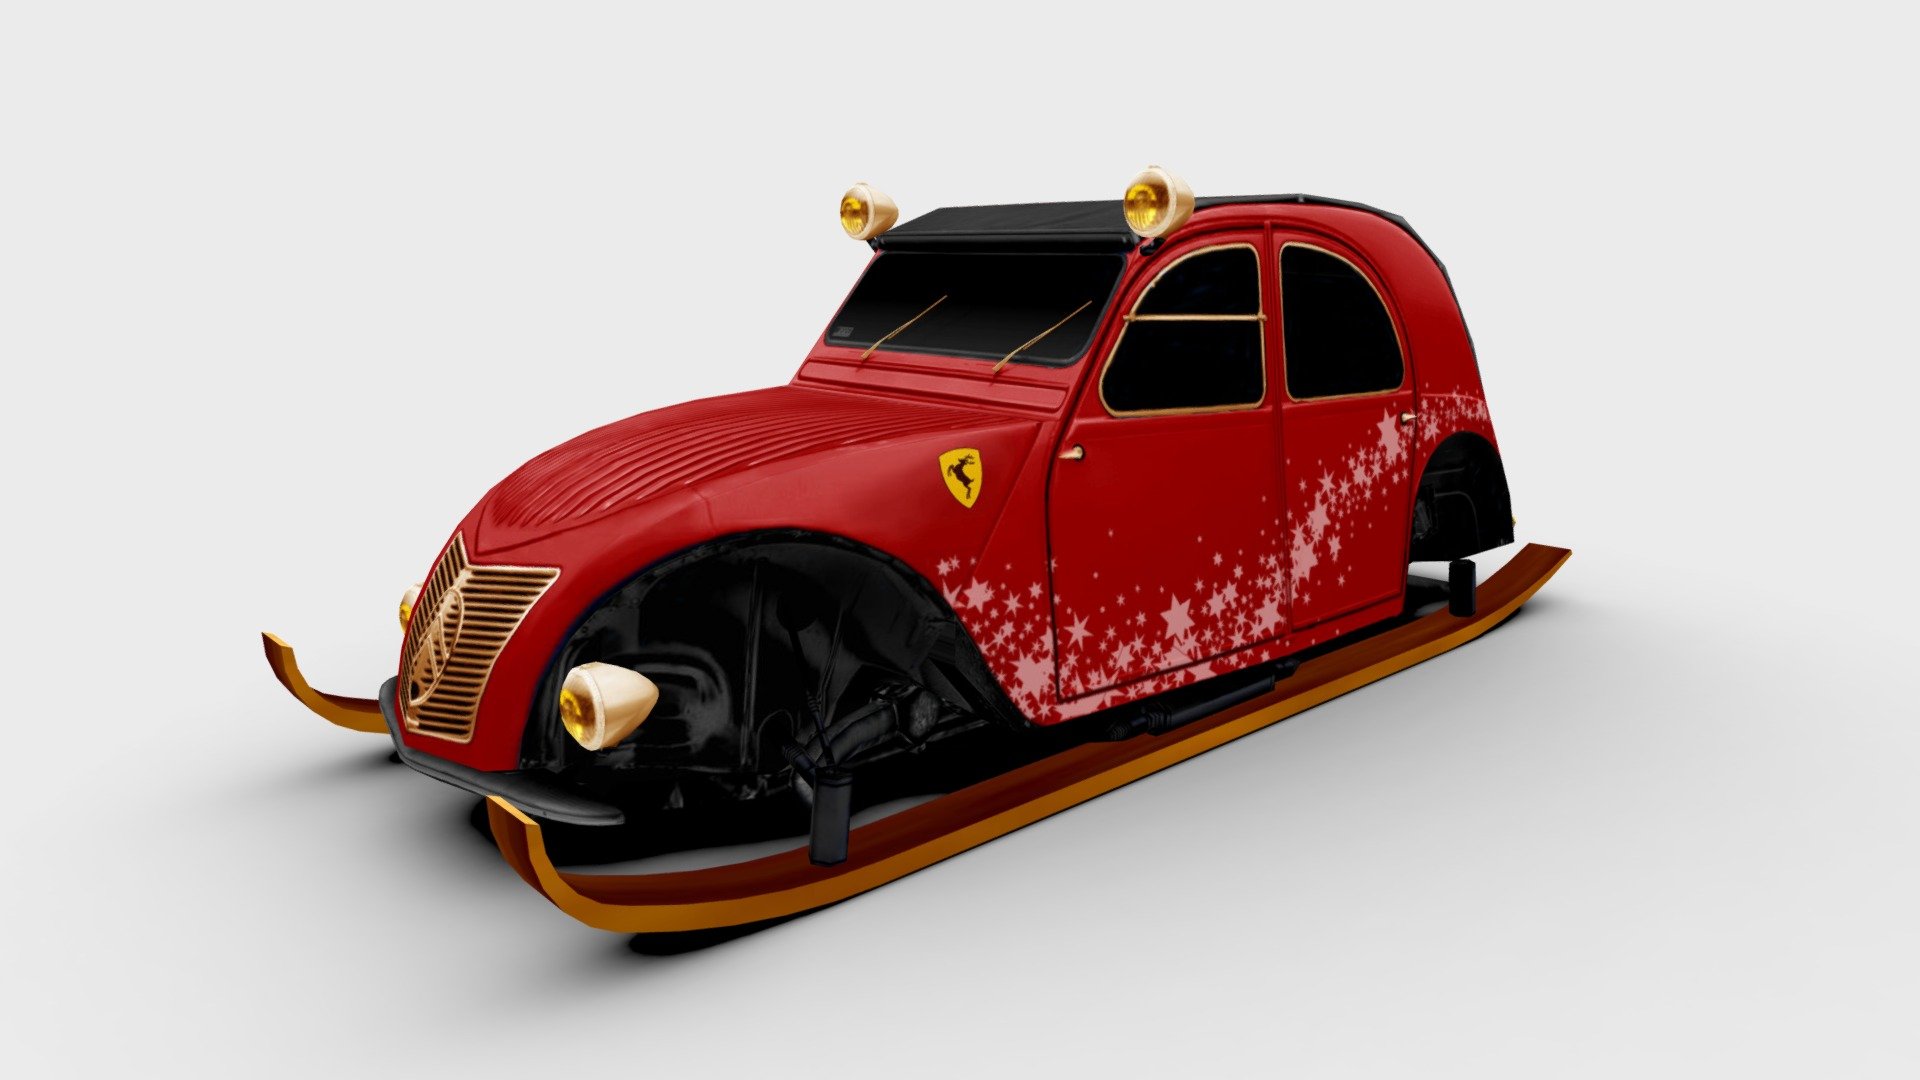 3d model of a Citroen 2CV A modified as a Santa's sleigh

This is a way of wishing everyone a Merry Christmas, with an interpretation of what Santa's sleigh would look like if he were a fan of the 2cv&hellip;

The model is very low-poly, full-scale, real photos texture (single 2048 x 2048 png).

Package includes 5 file formats and texture (3ds, fbx, dae, obj and skp)

Hope you enjoy it.

José Bronze - Citroen 2CV  Xmas - Buy Royalty Free 3D model by Jose Bronze (@pinceladas3d) 3d model